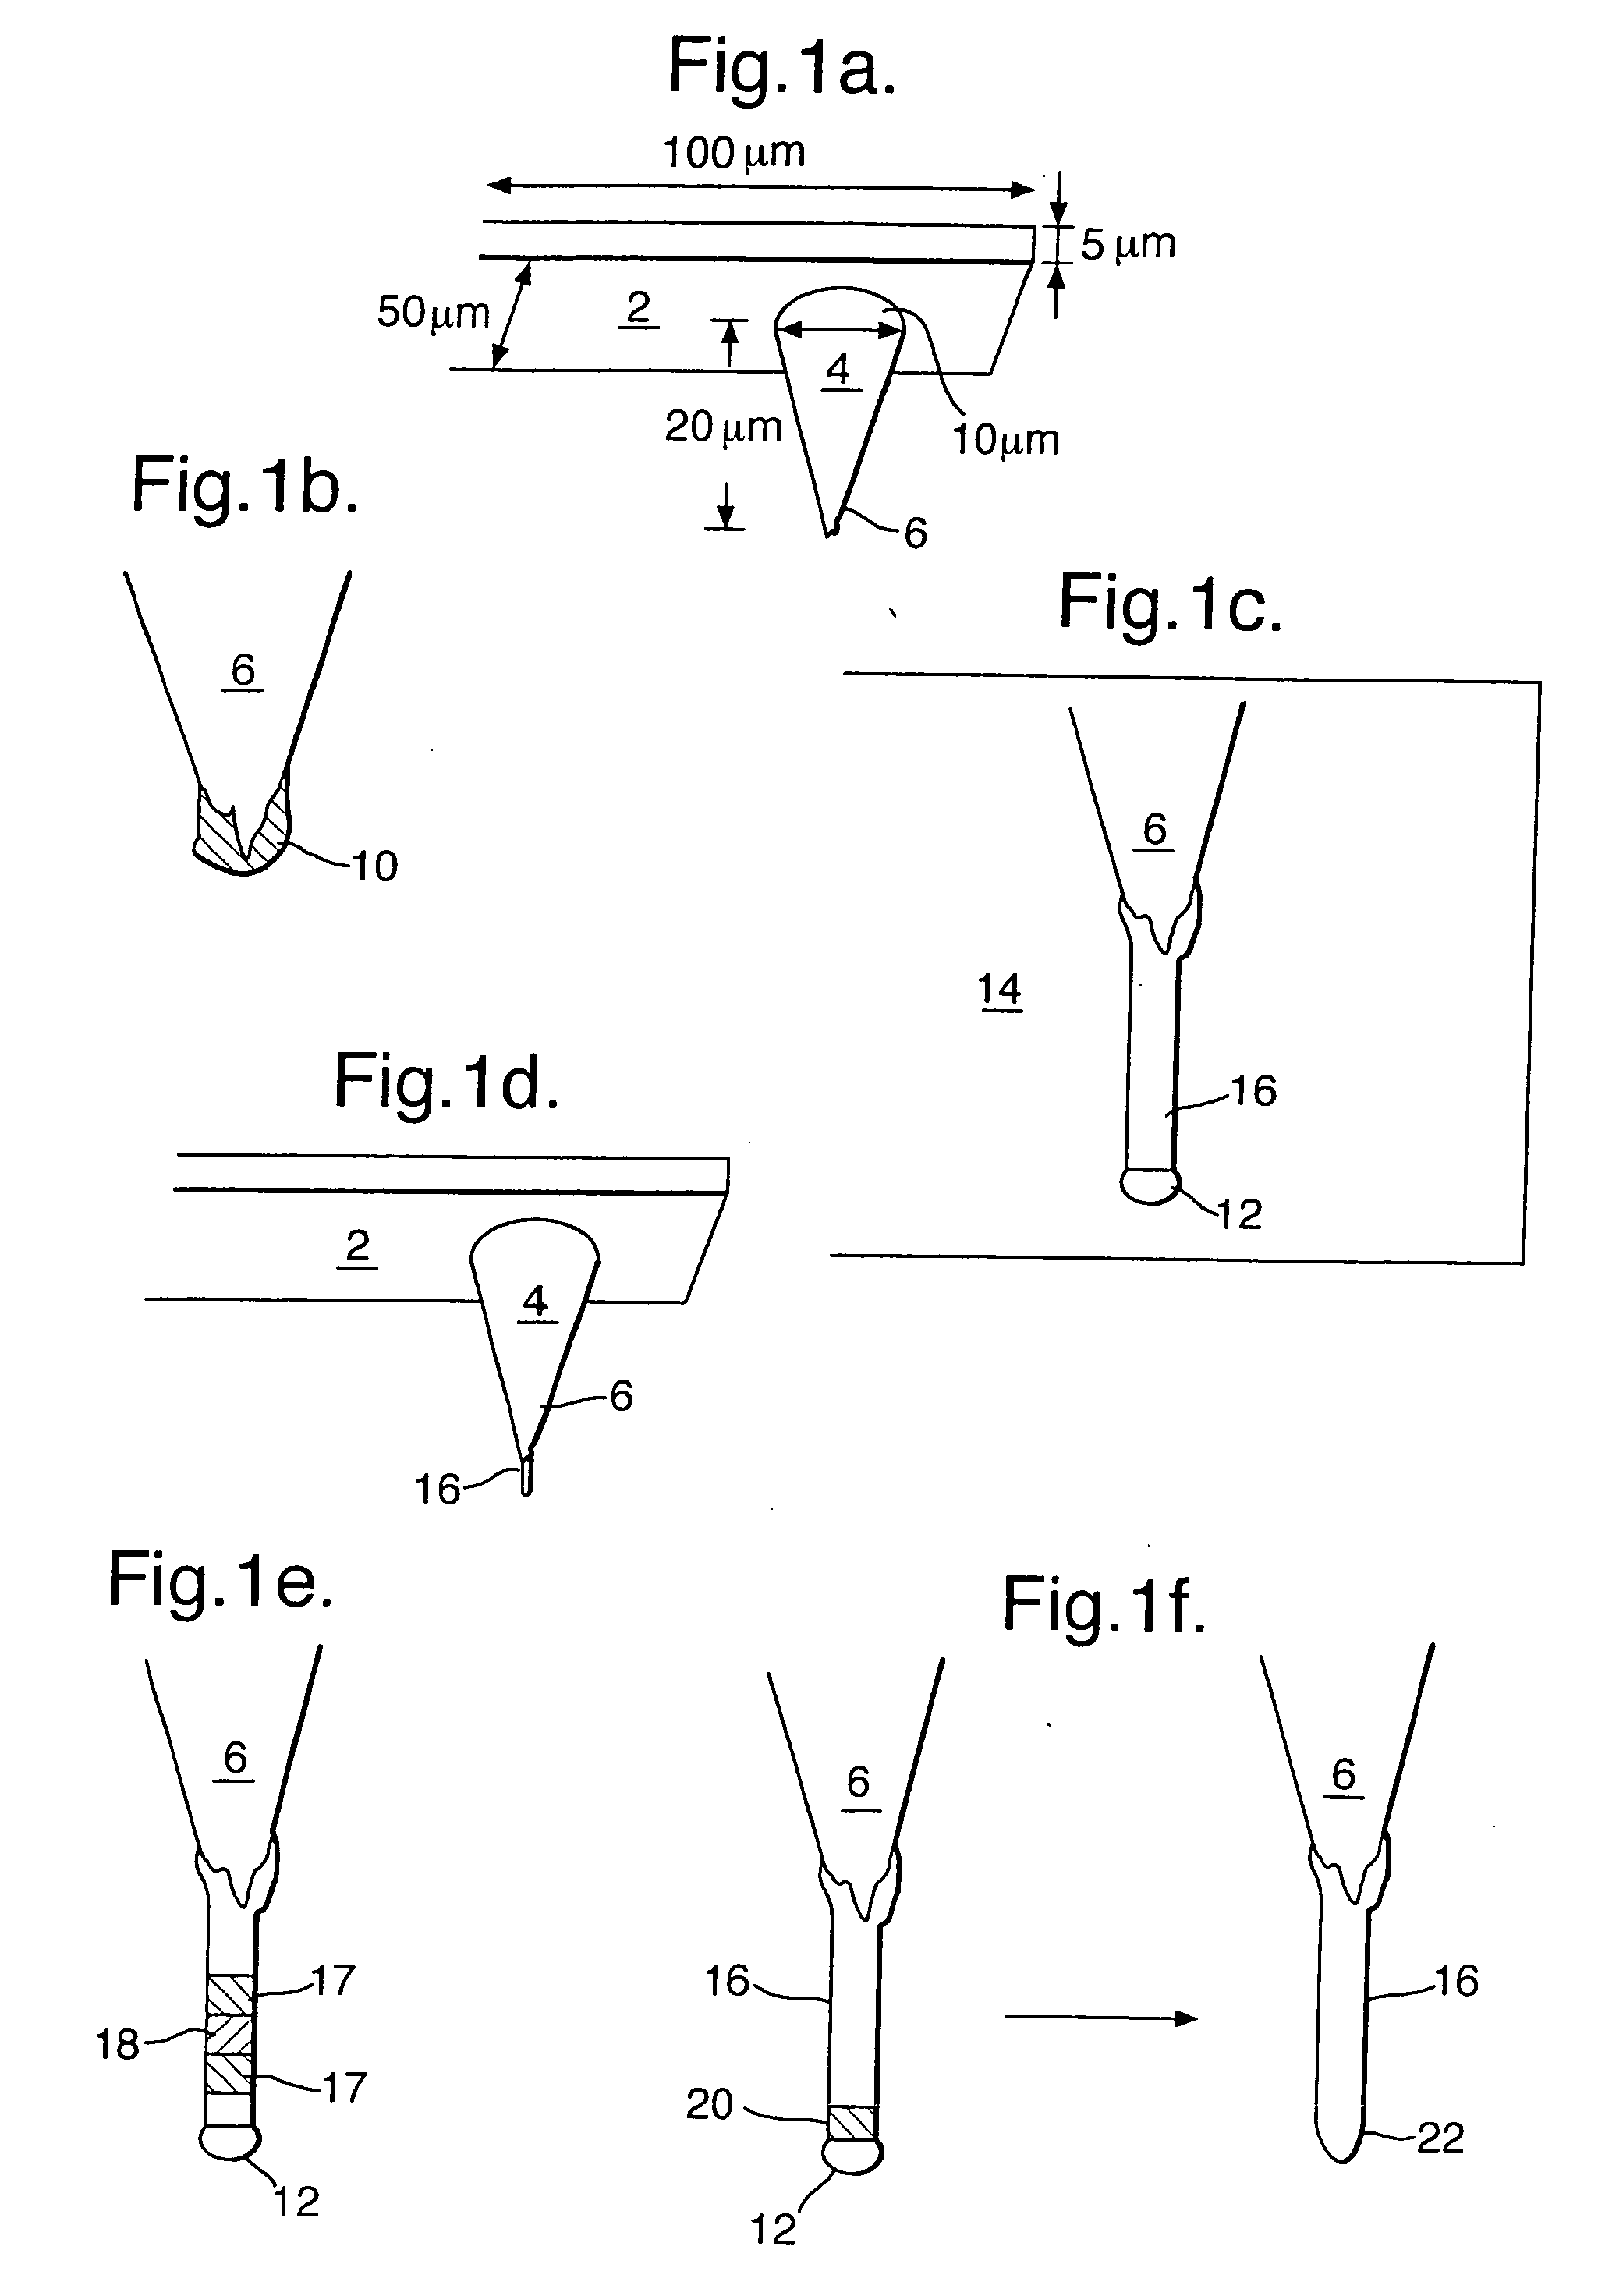 Probe structures incorporating nanowhiskers, production methods thereof and methods of forming nanowhiskers